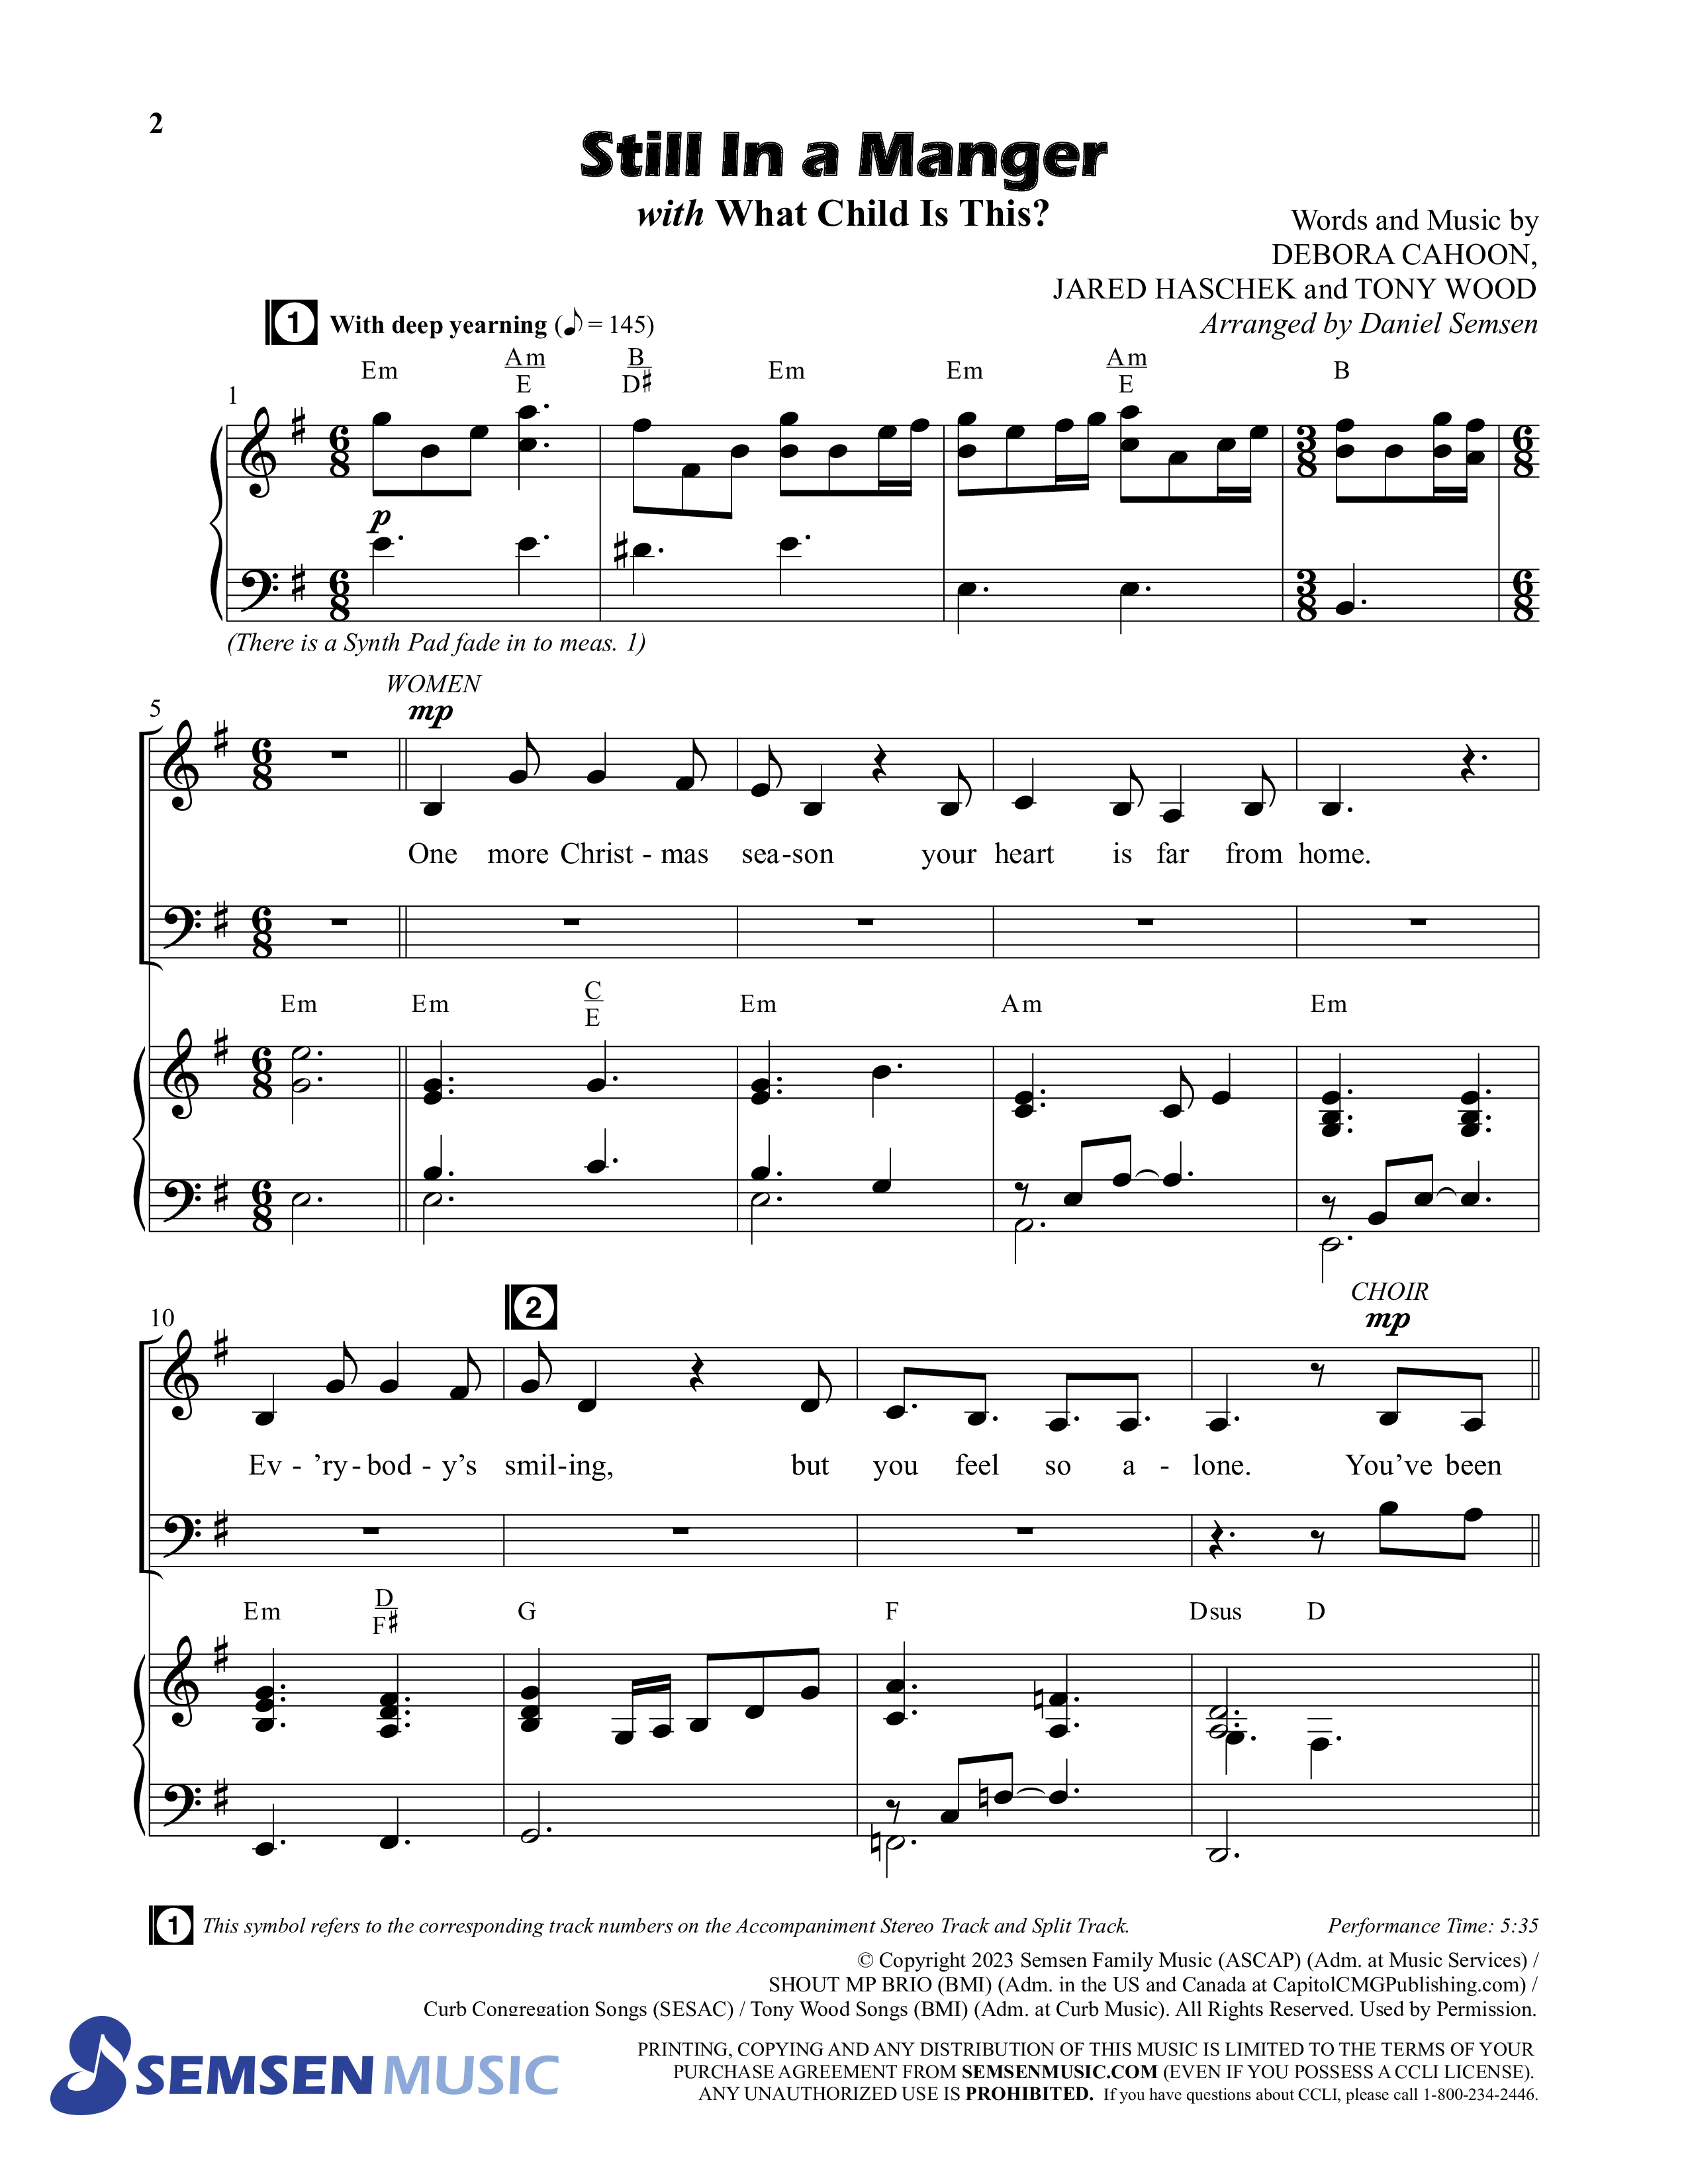 Still In A Manger with What Child Is This (Choral Anthem SATB) Anthem (SATB/Piano) (Semsen Music / Arr. Daniel Semsen)